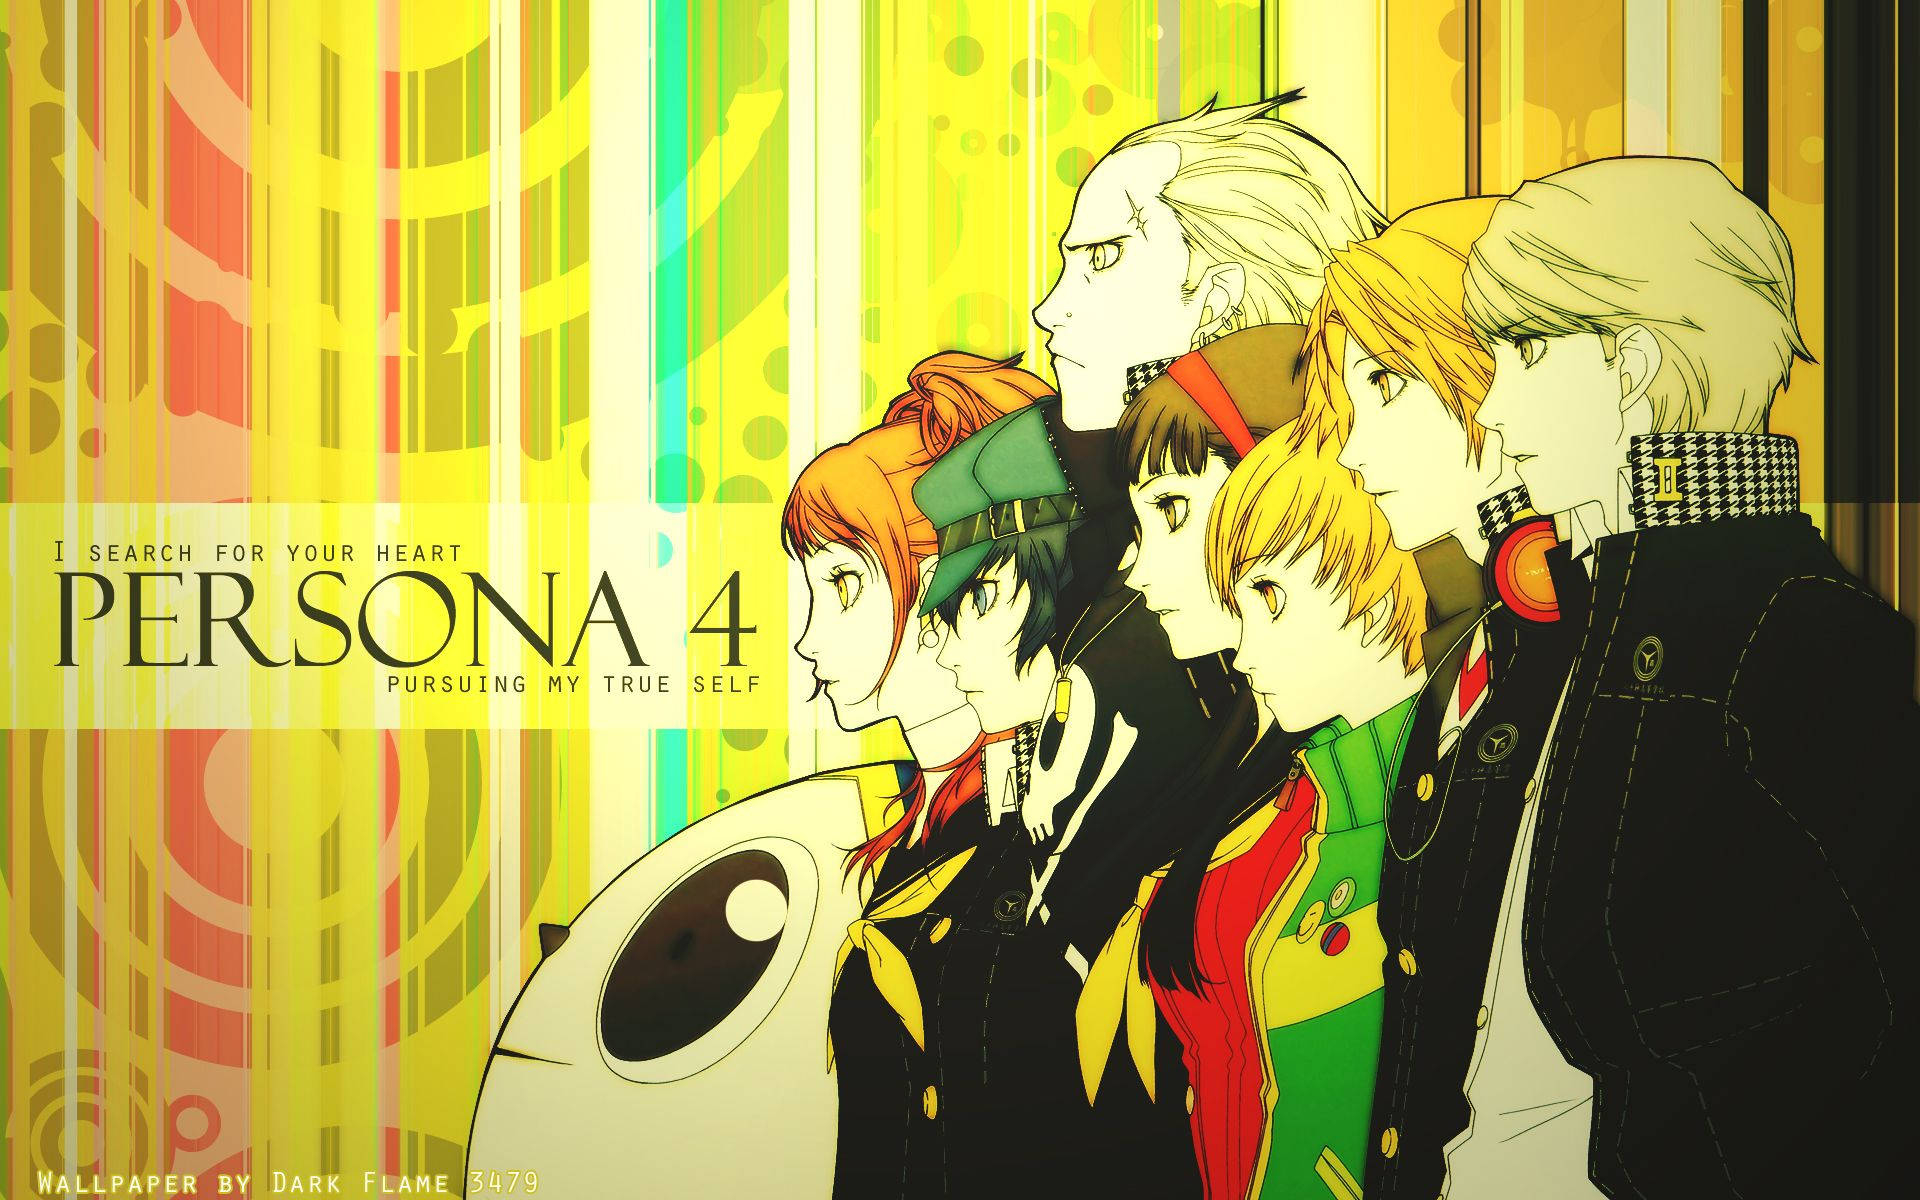 1920x1200 40 Persona Wallpapers \u0026 Backgrounds For FREE